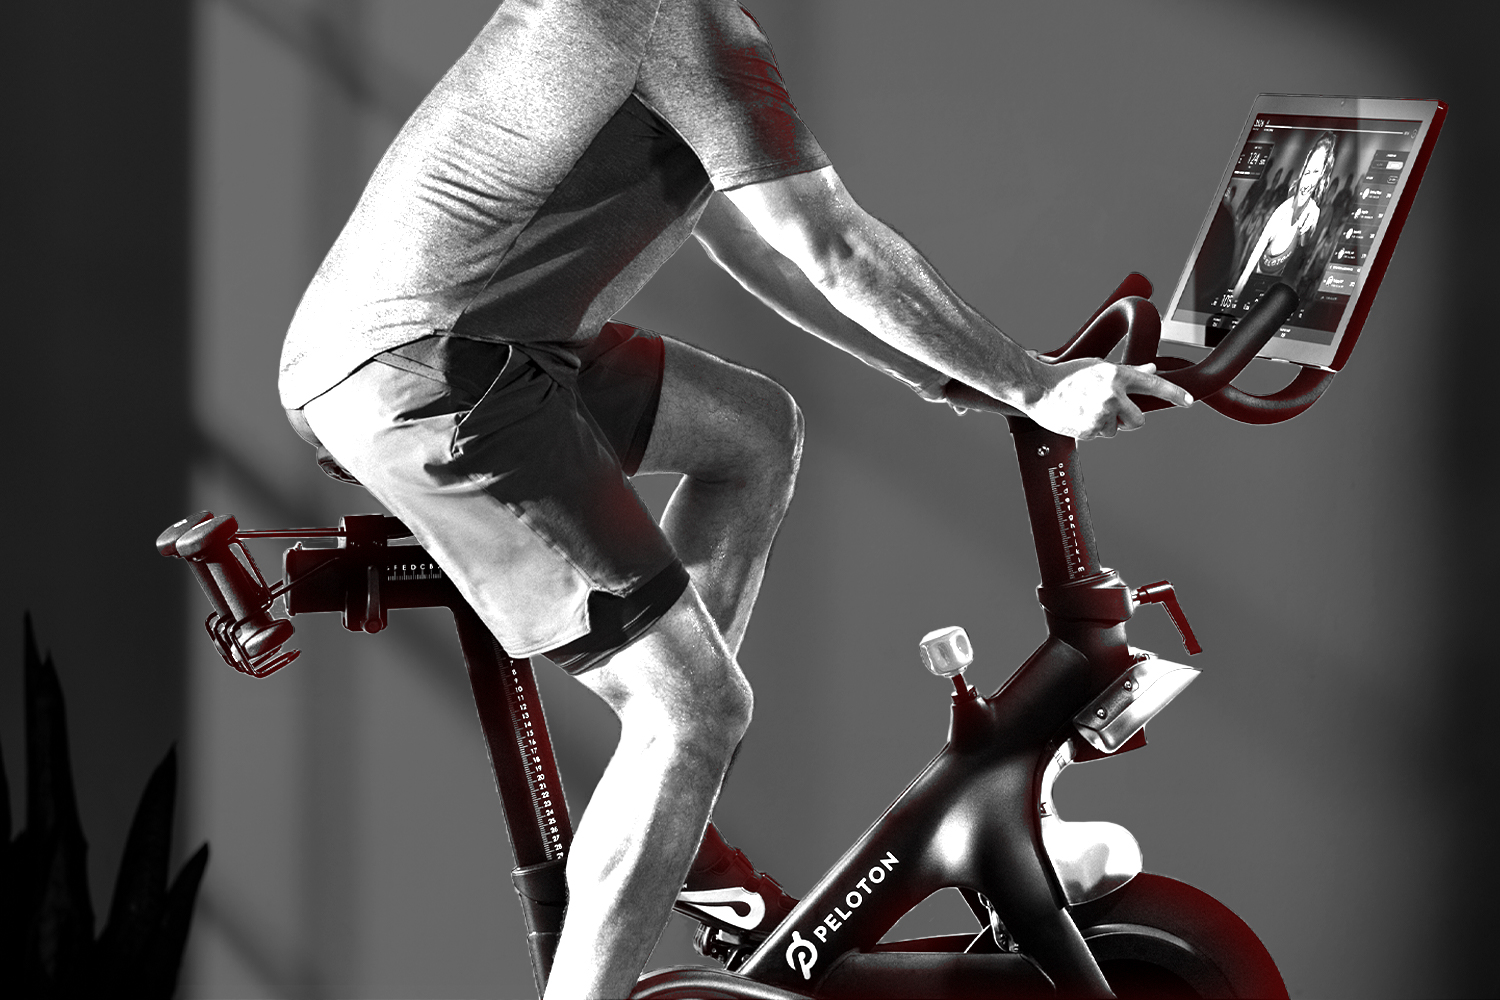 Peloton launched his first training game for the connected bicycle owner